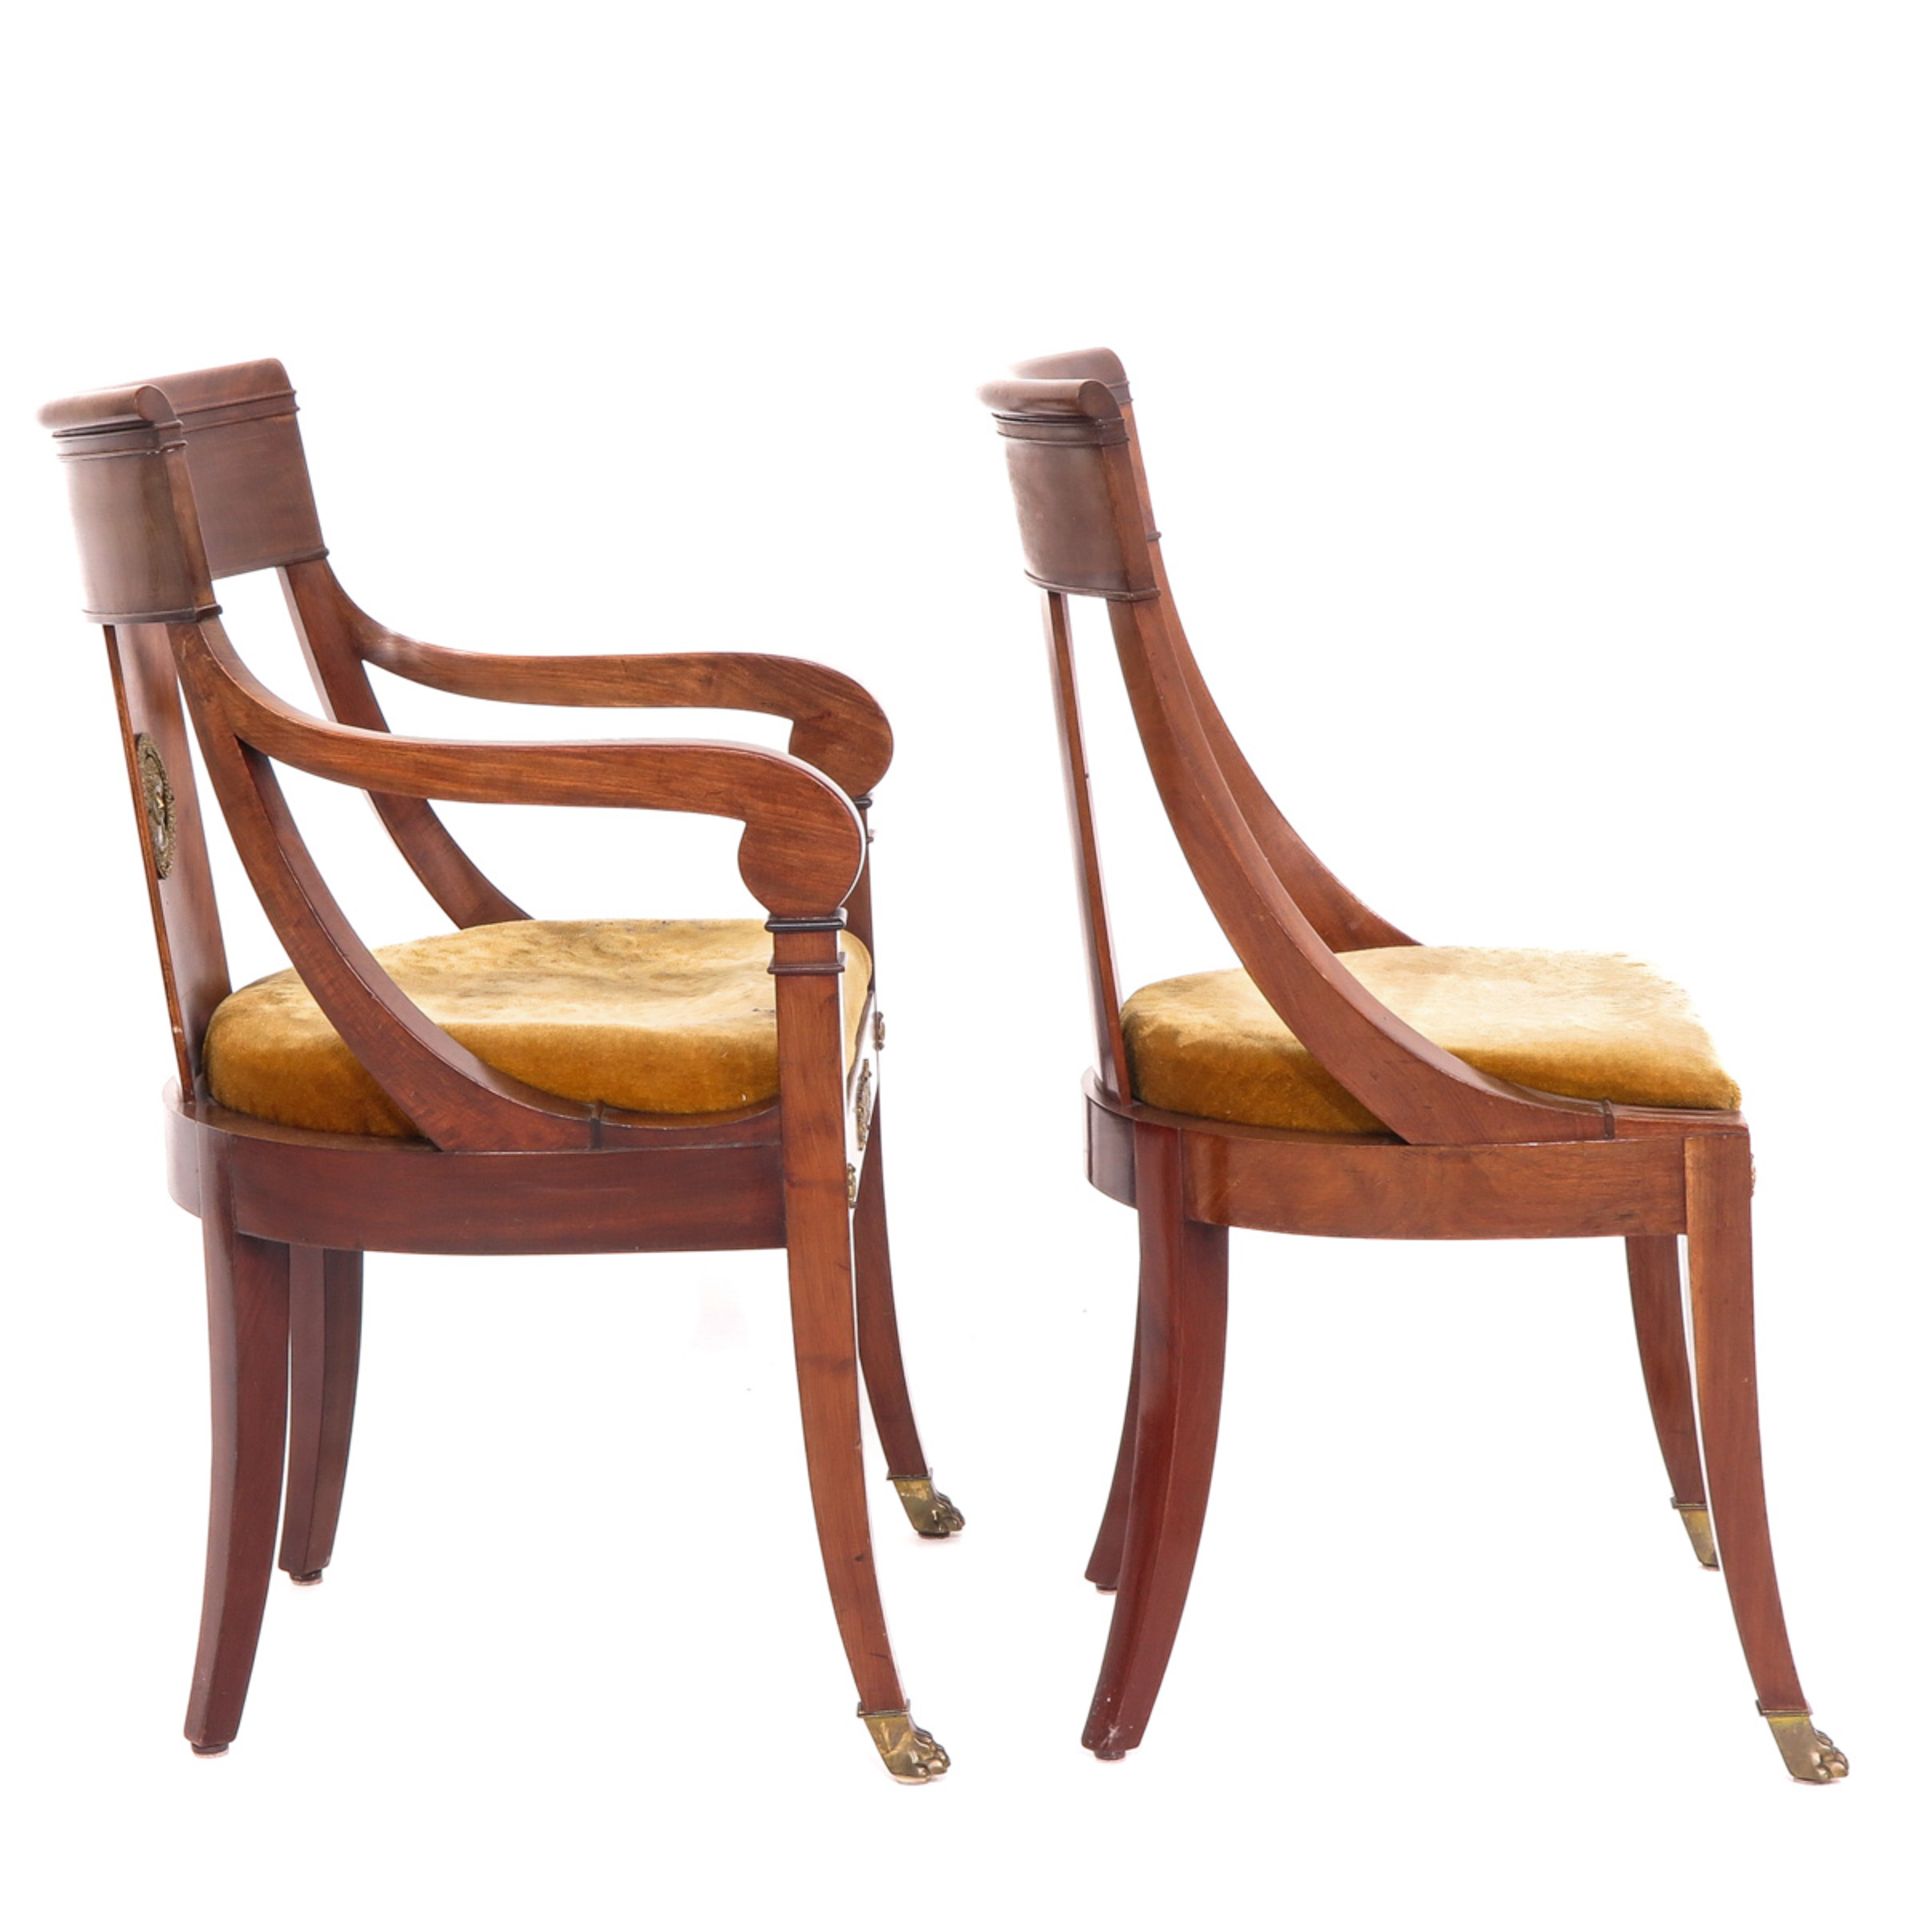 A Pair of Empire Period Chairs - Image 4 of 10